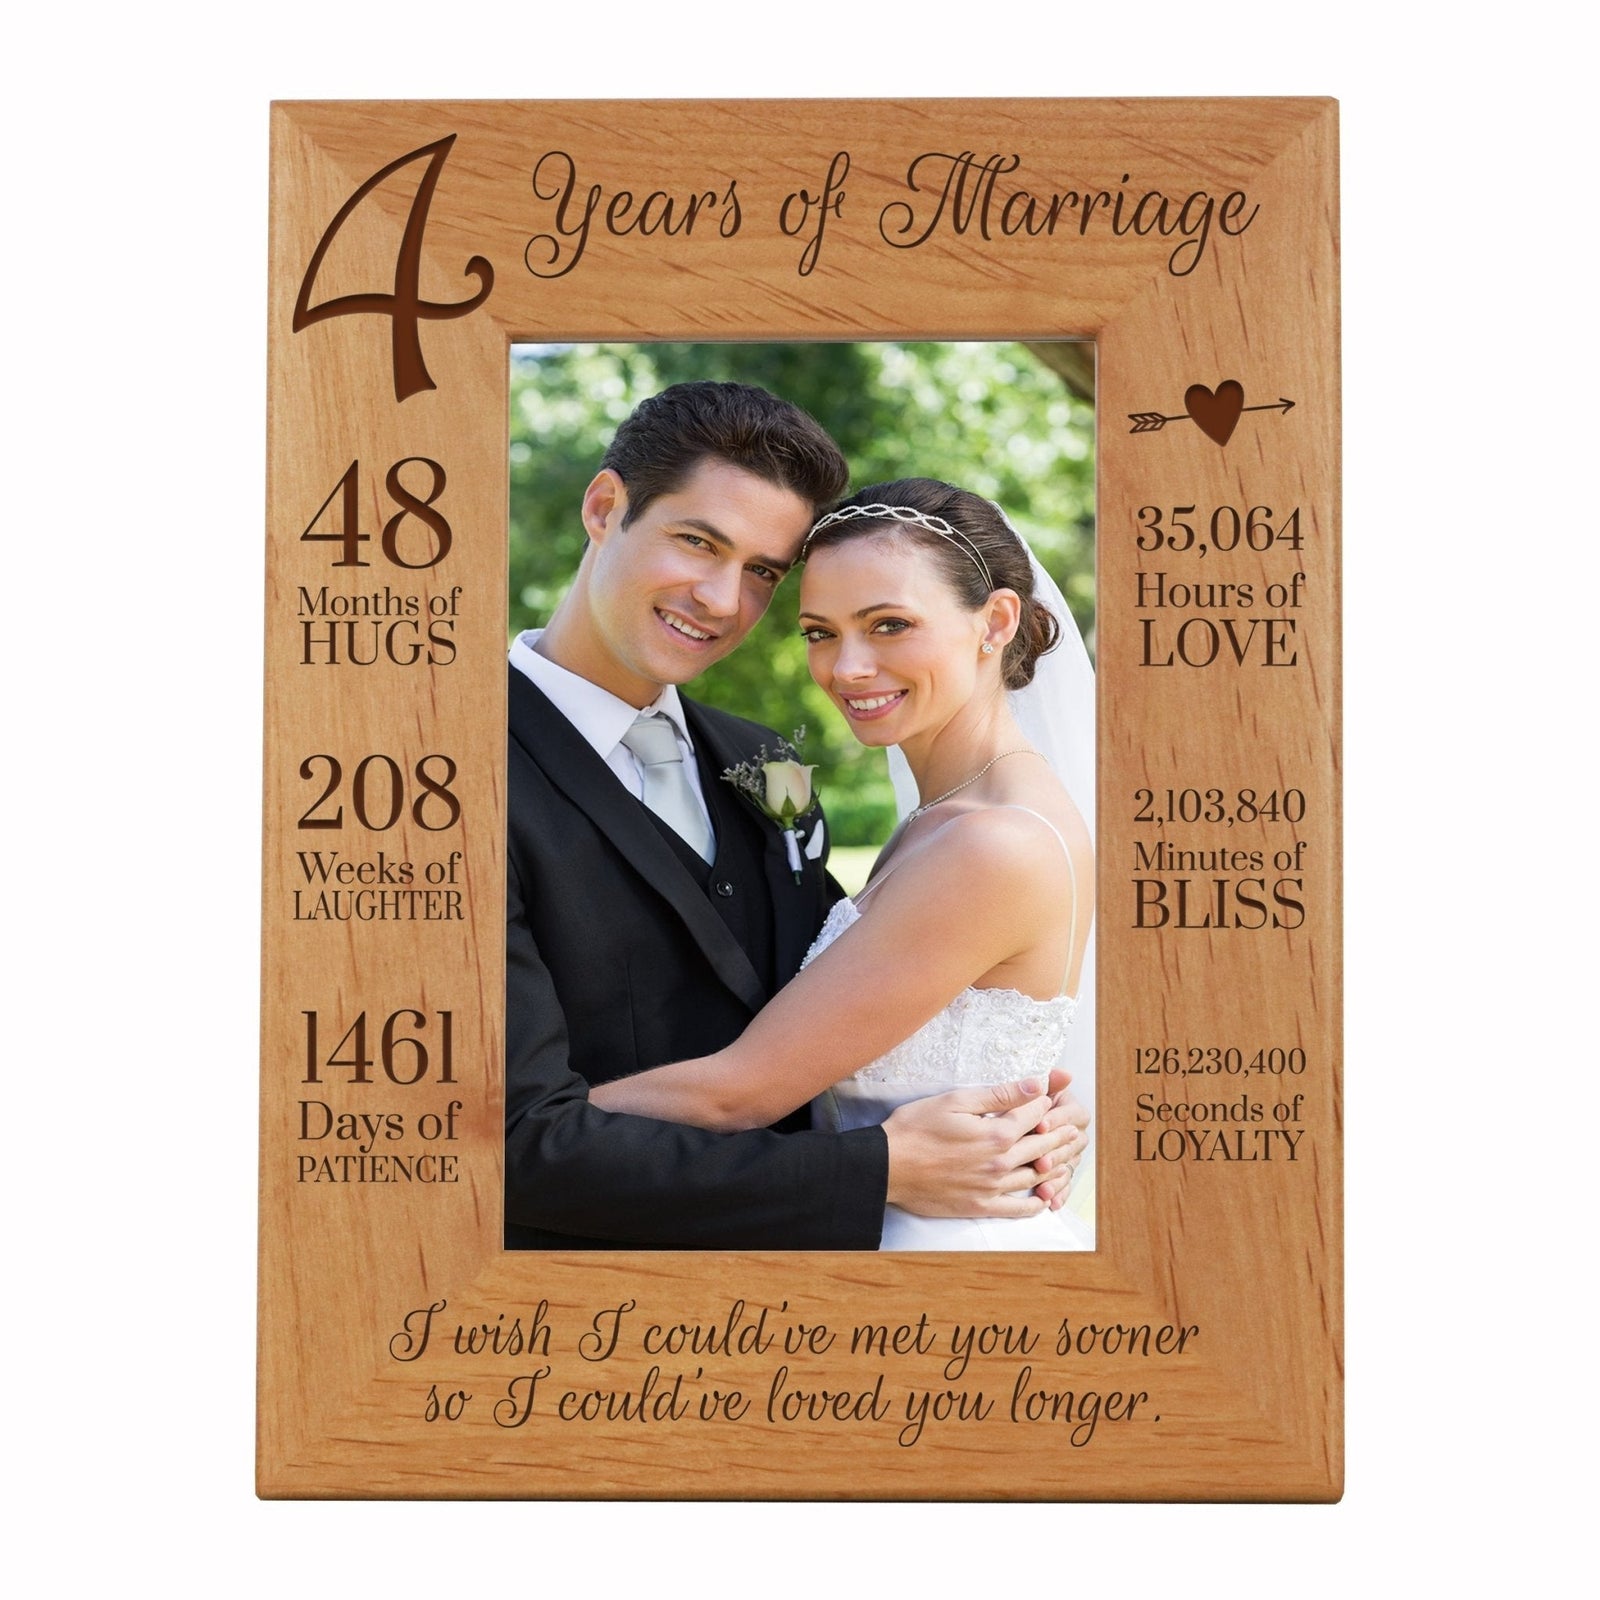 Engraved 4th Anniversary Picture Frame Gift for Couples - Met You Sooner - LifeSong Milestones